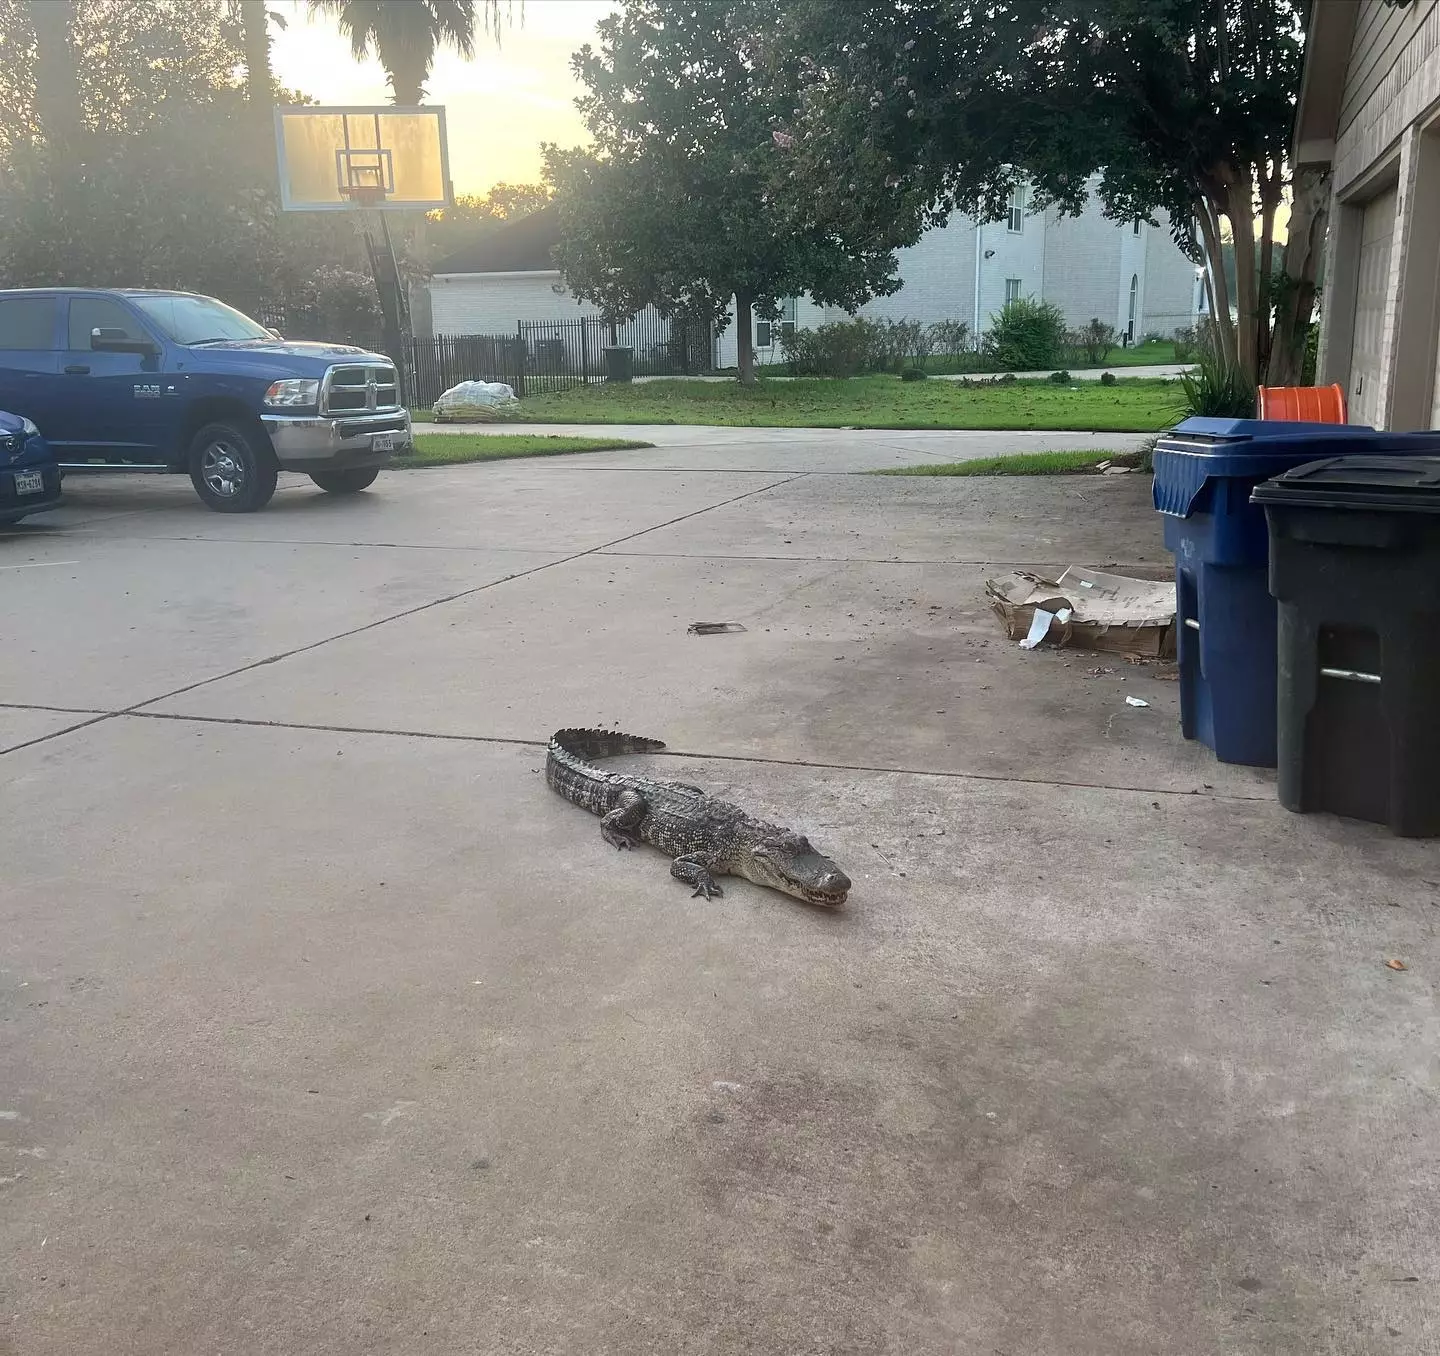 The alligator was waiting at the front door.